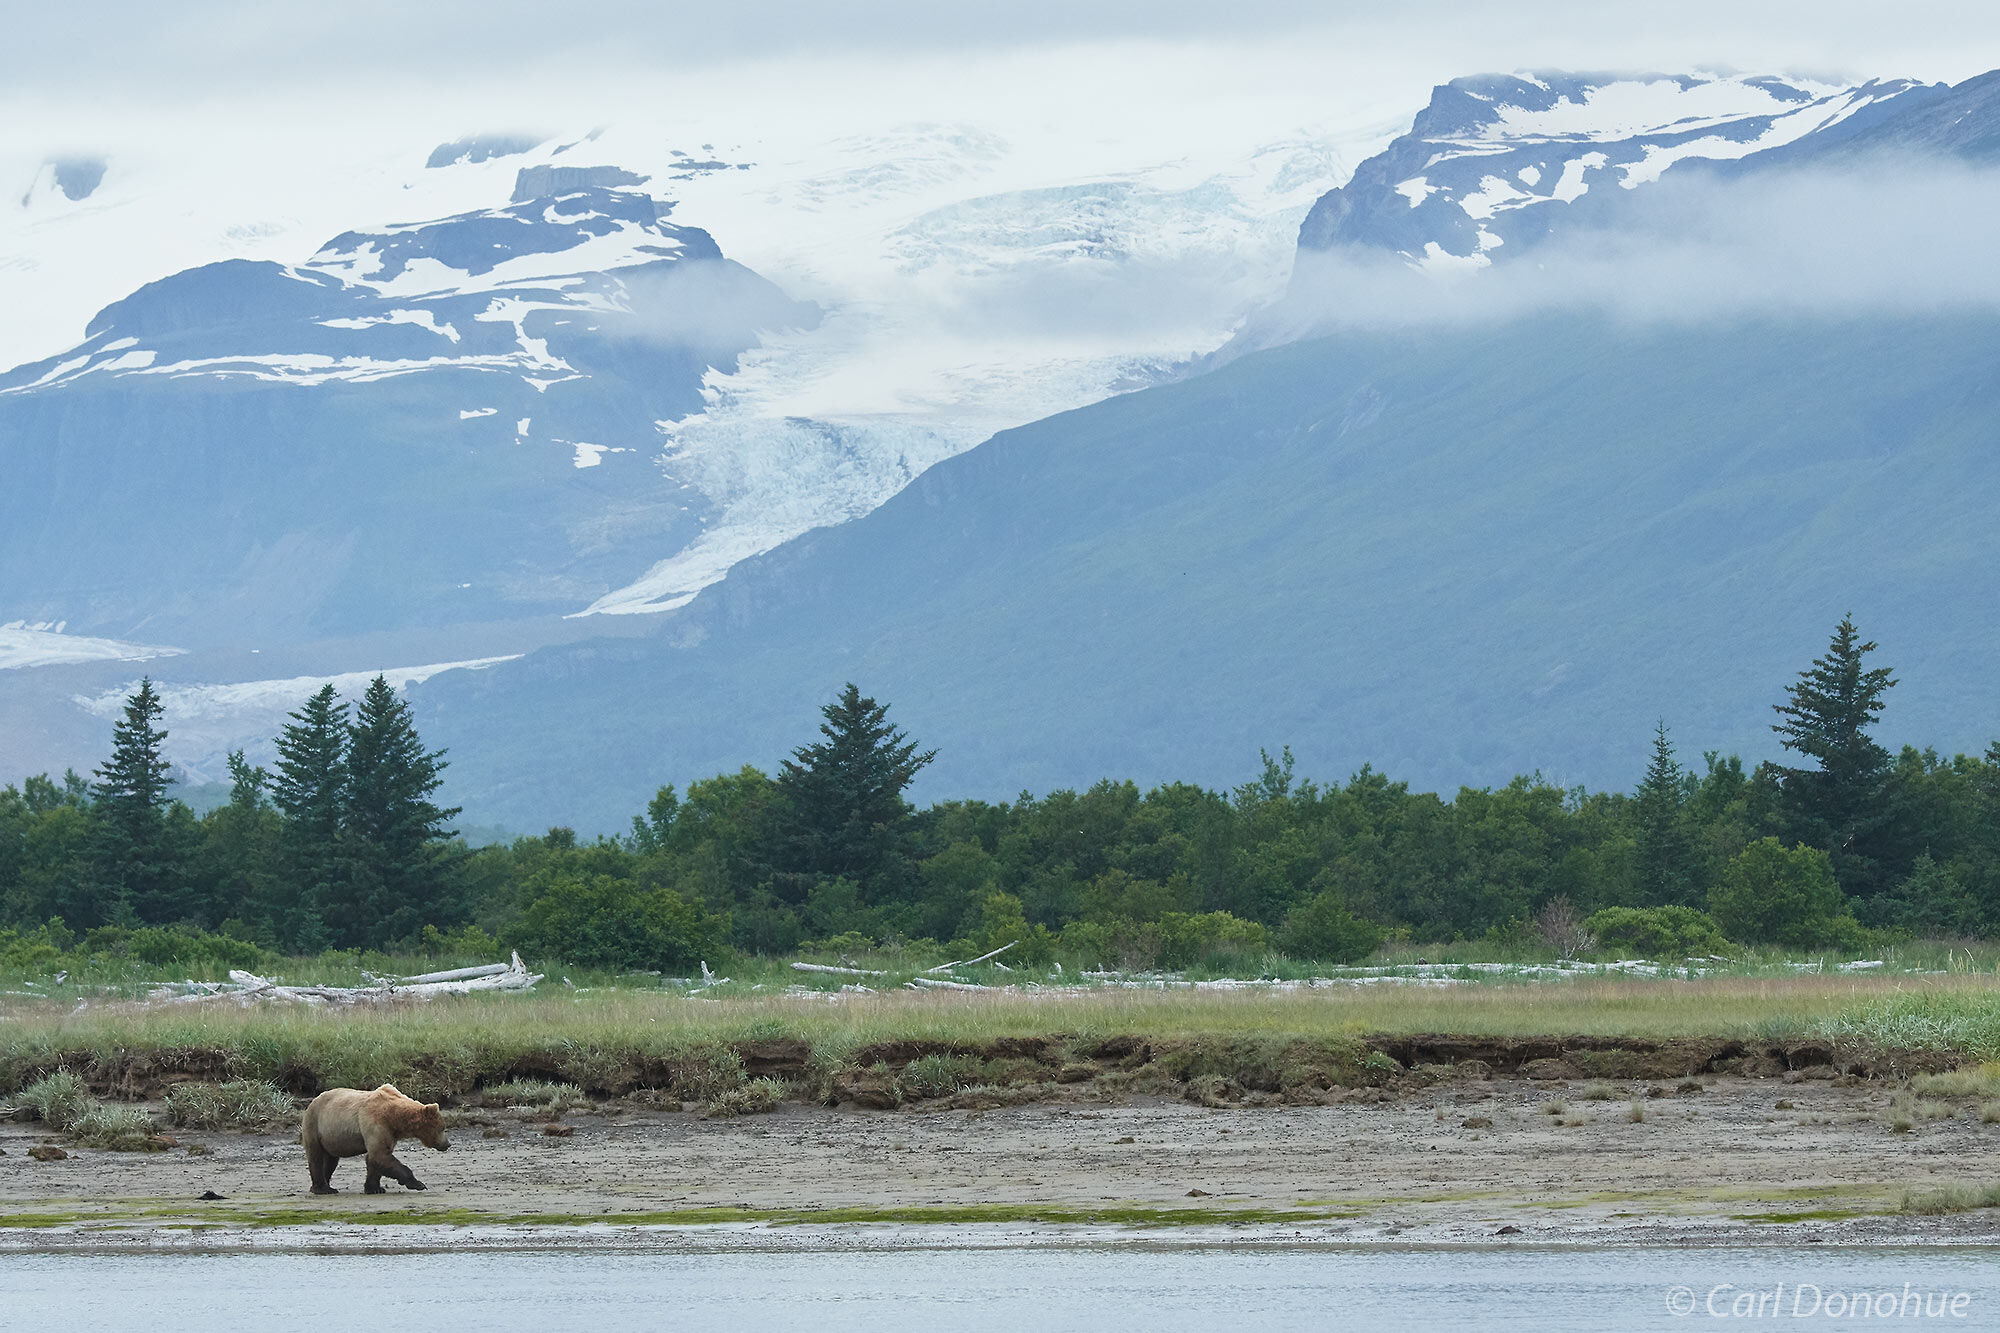 Brown bear and the awesome landscape of Hallo Bay, Mount Steller, Katmai National Park and Preserve, Alaska.